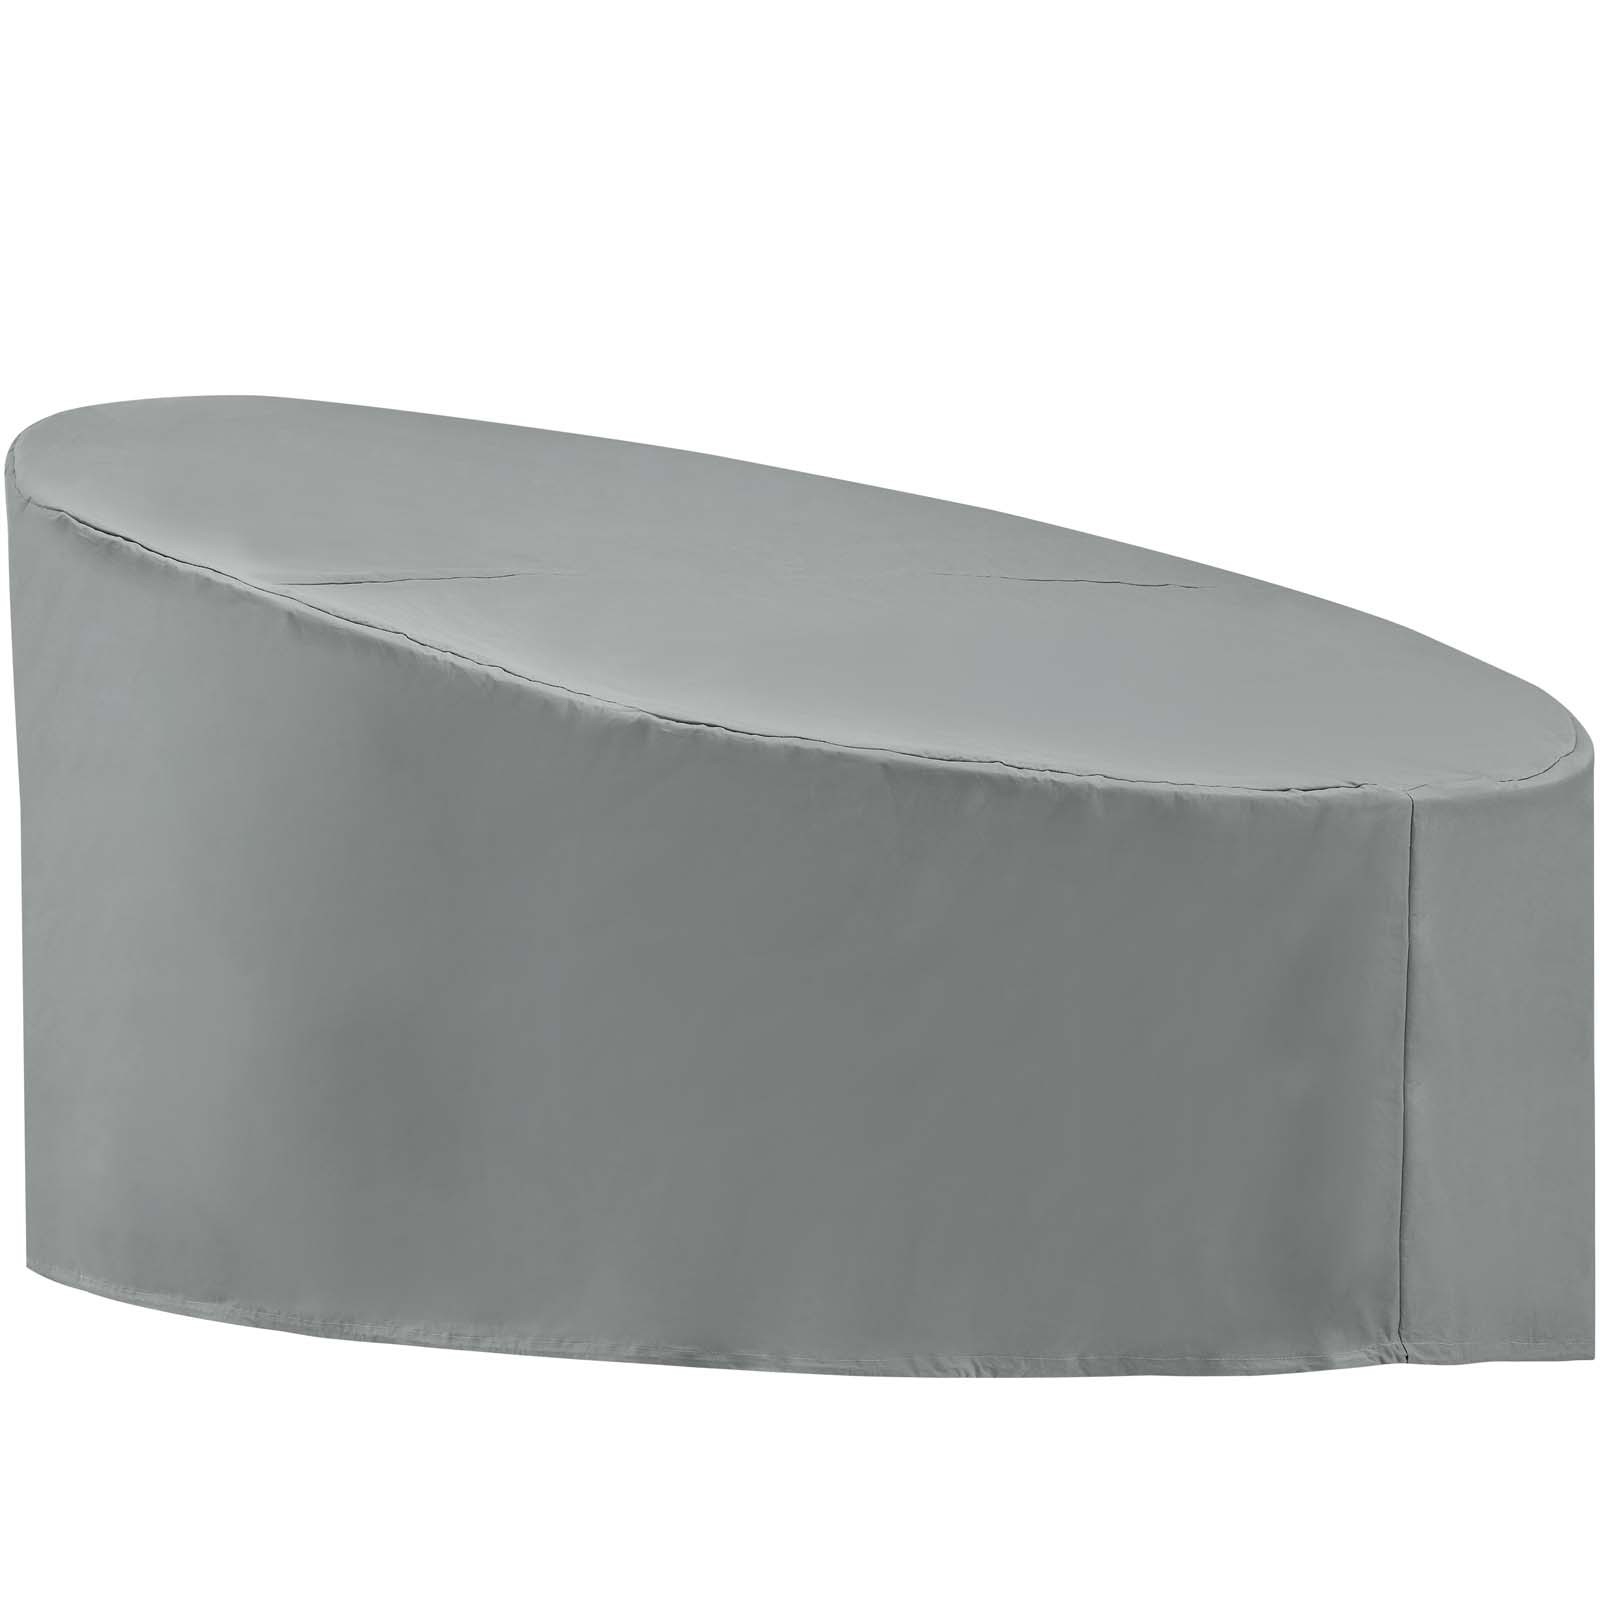 Immerse Siesta and Convene Canopy Daybed Outdoor Patio Furniture Cover in Gray